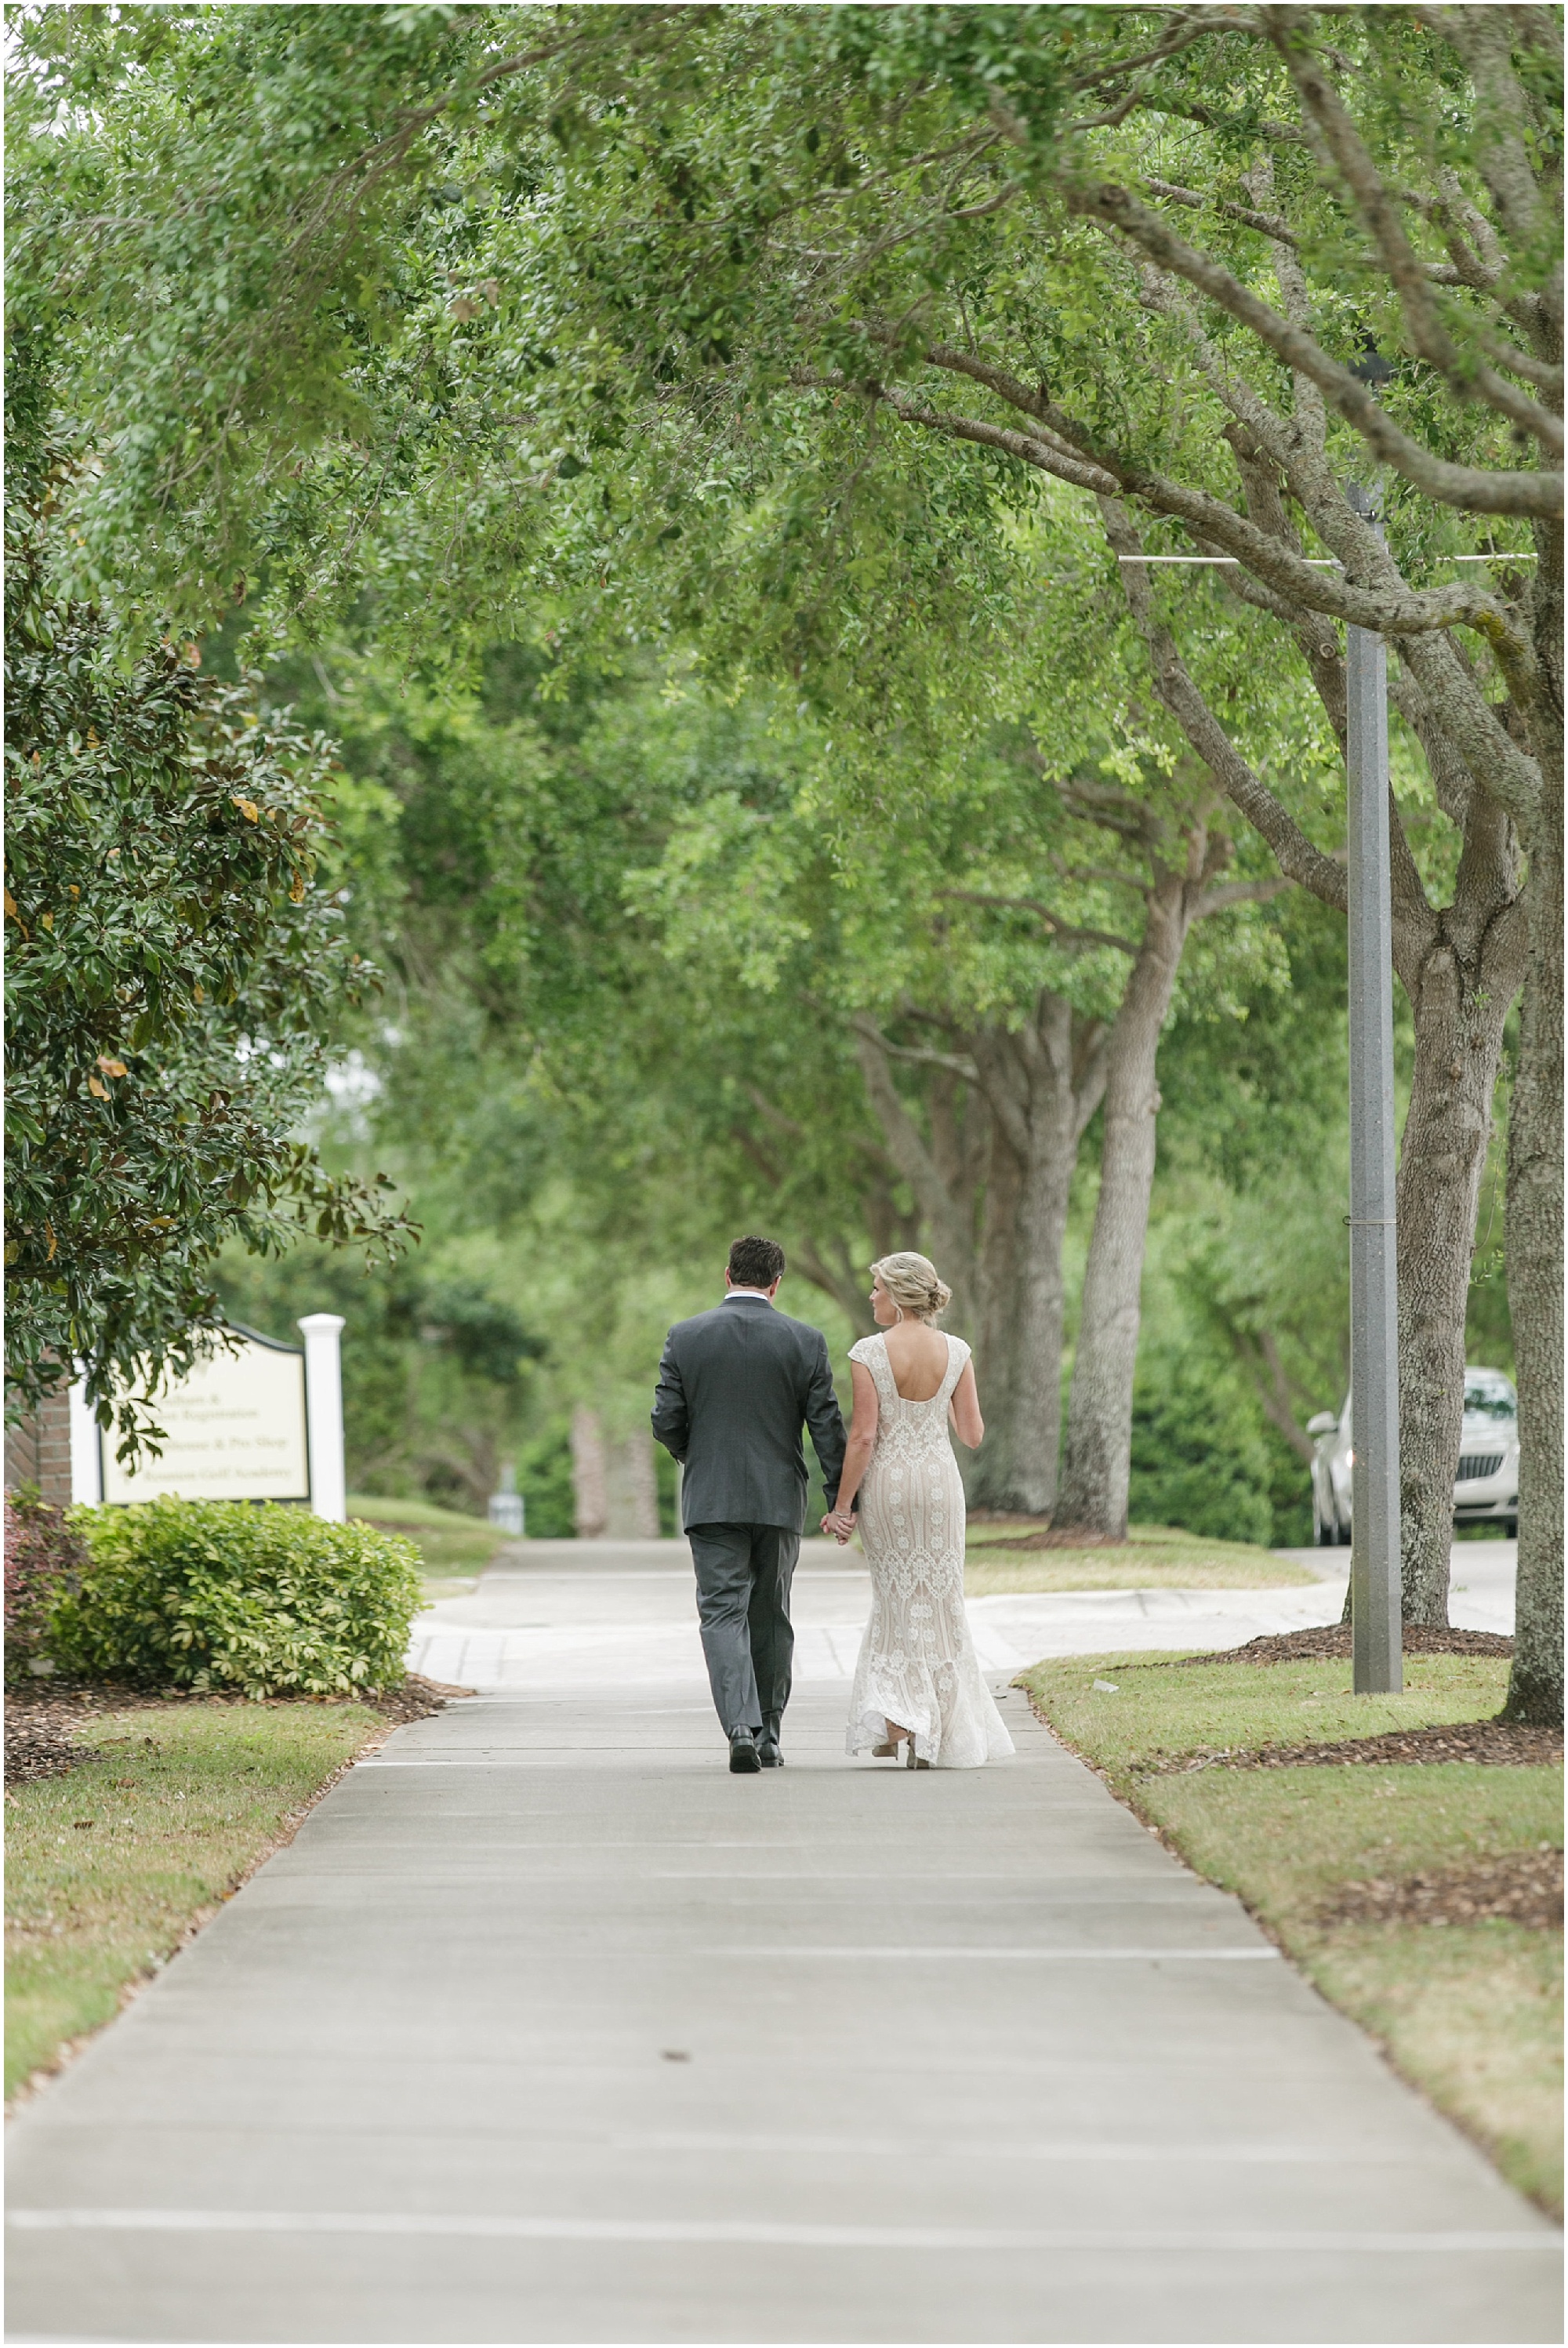 Bride and groom walking down the sidewalk and holding hands. 